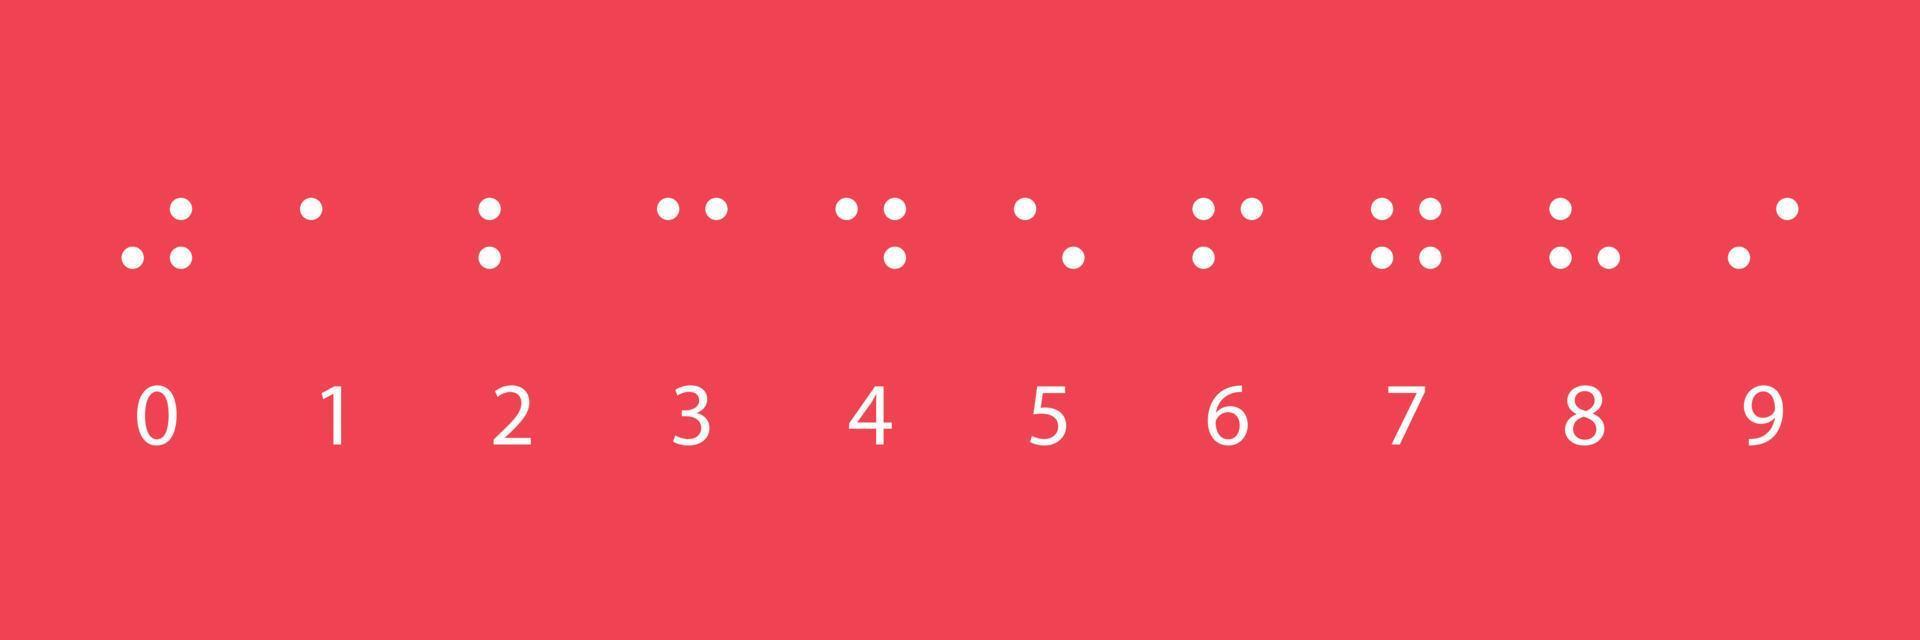 Braille numbers. Tactile writing system used by people who visually impaired. Vector illustration on red background